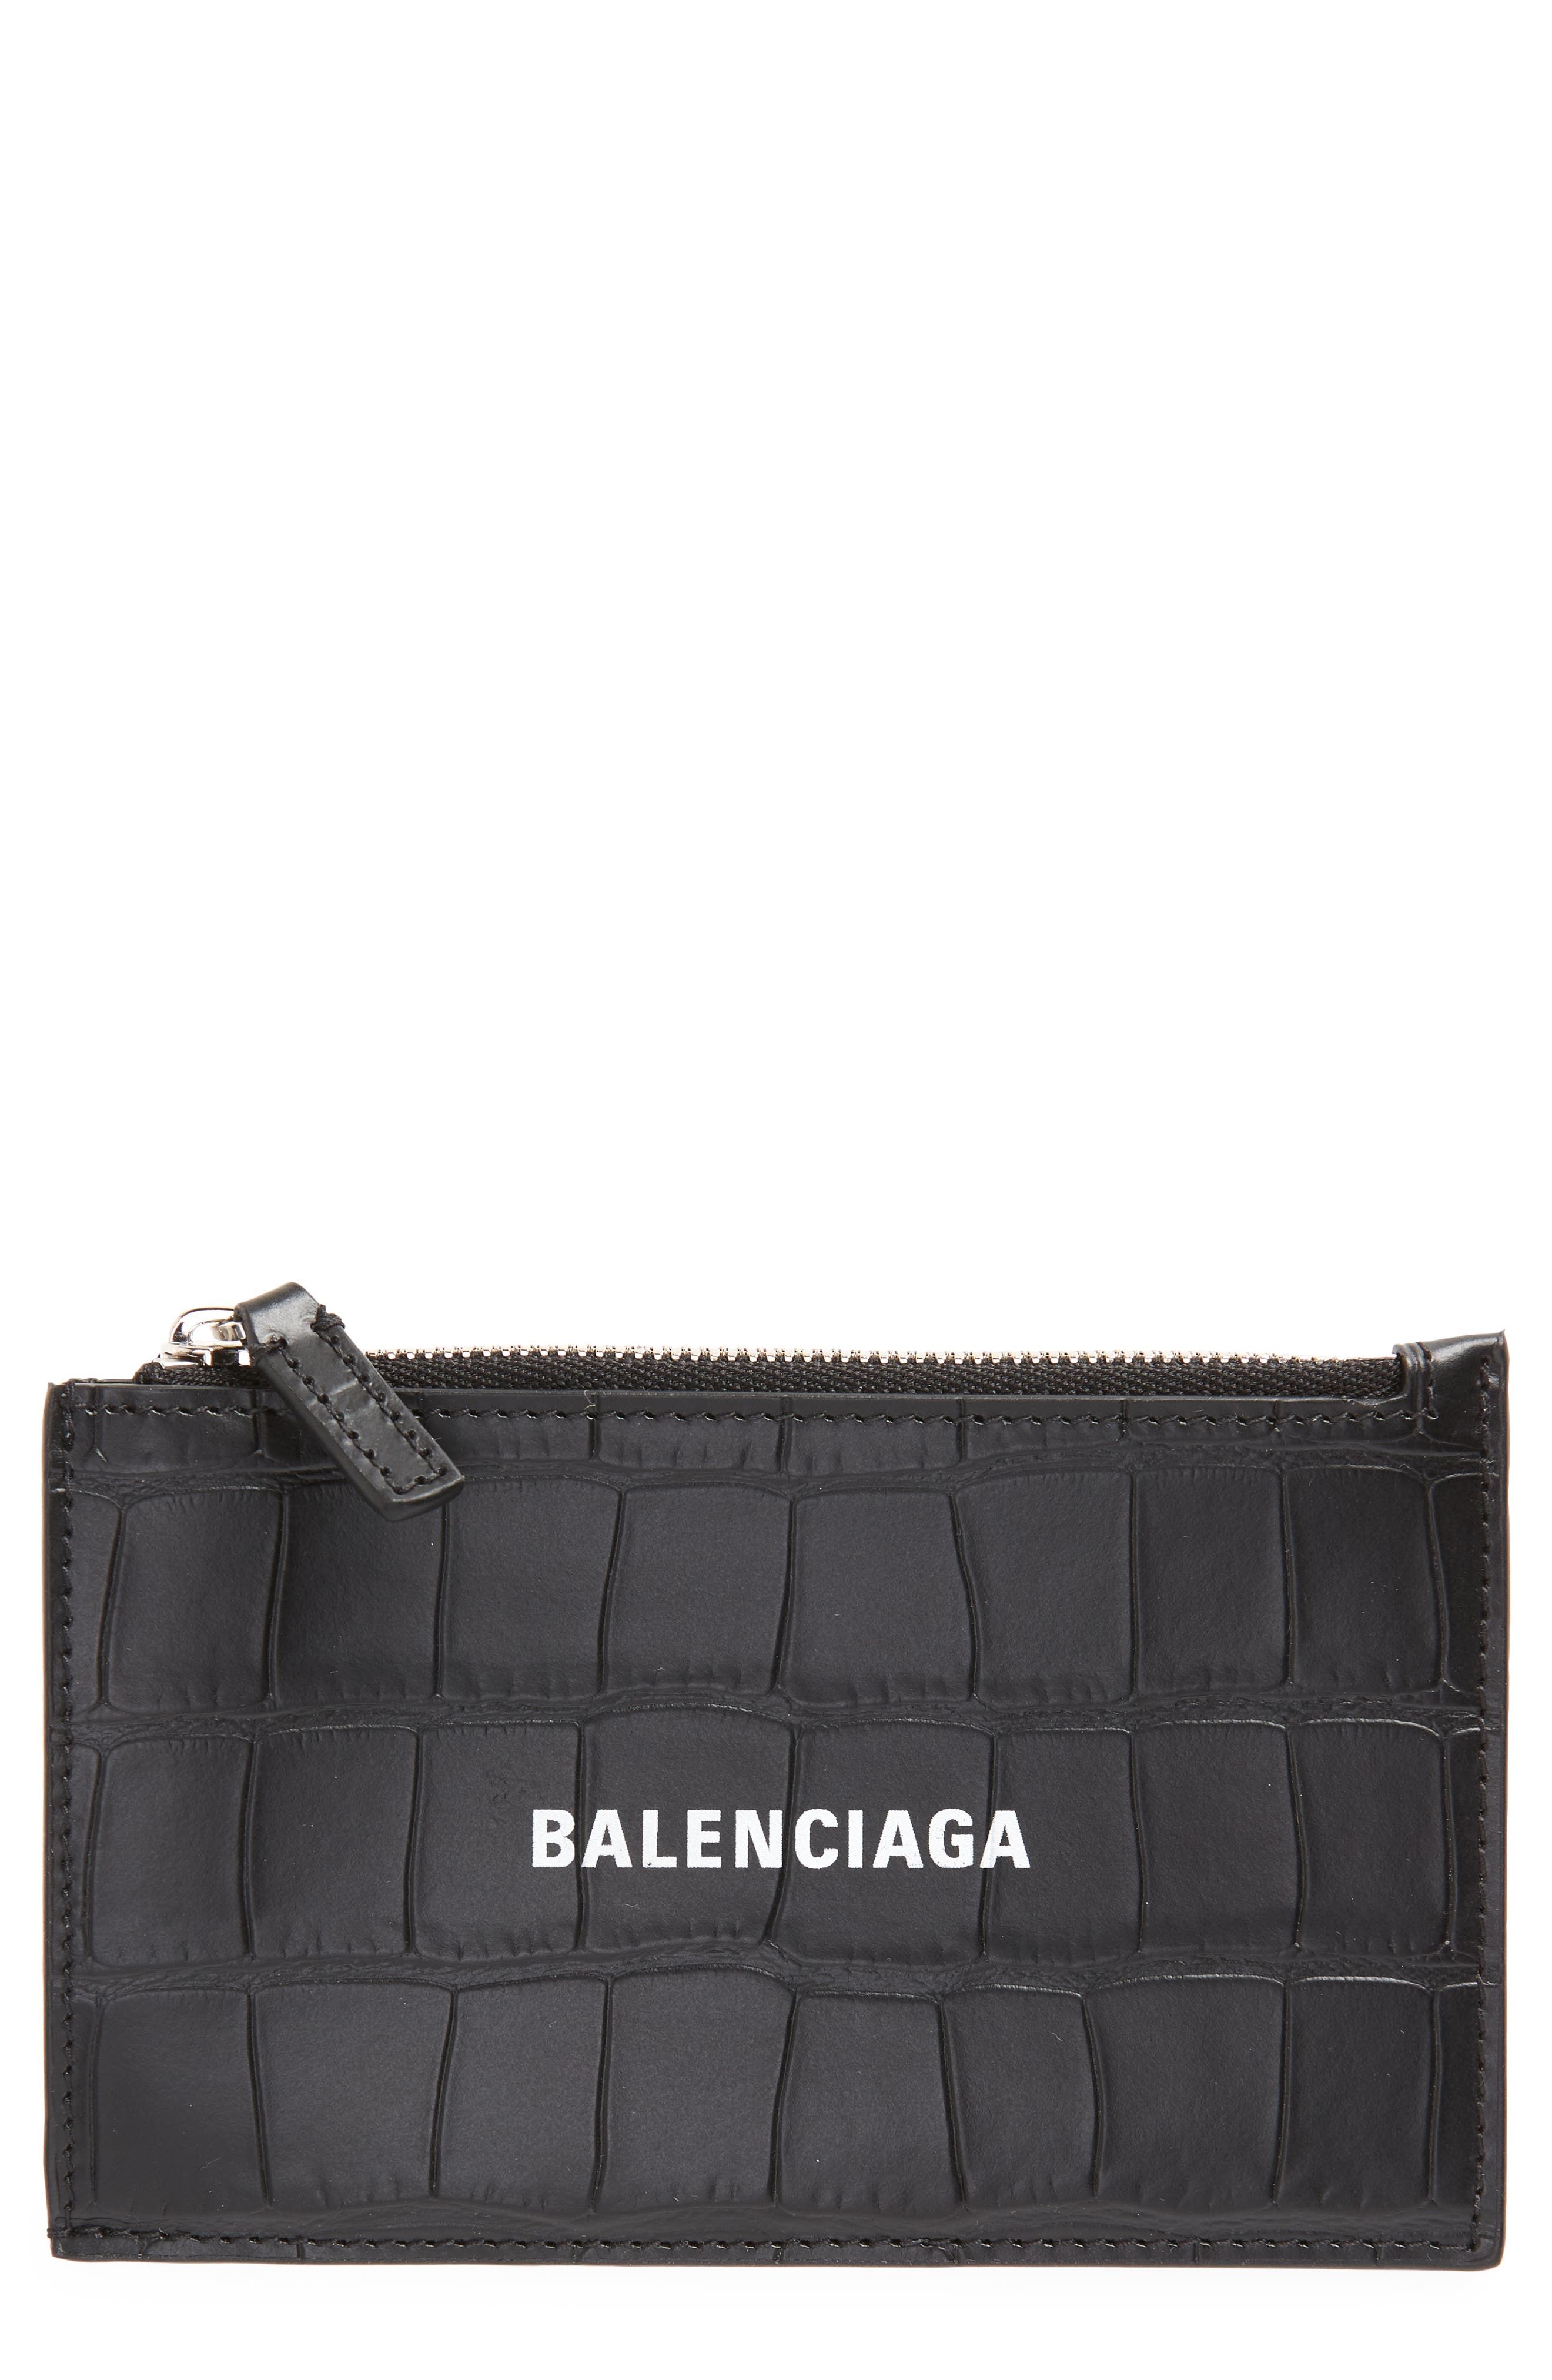 Balenciaga Logo Croc Embossed Leather Zip Card Case in Black at Nordstrom